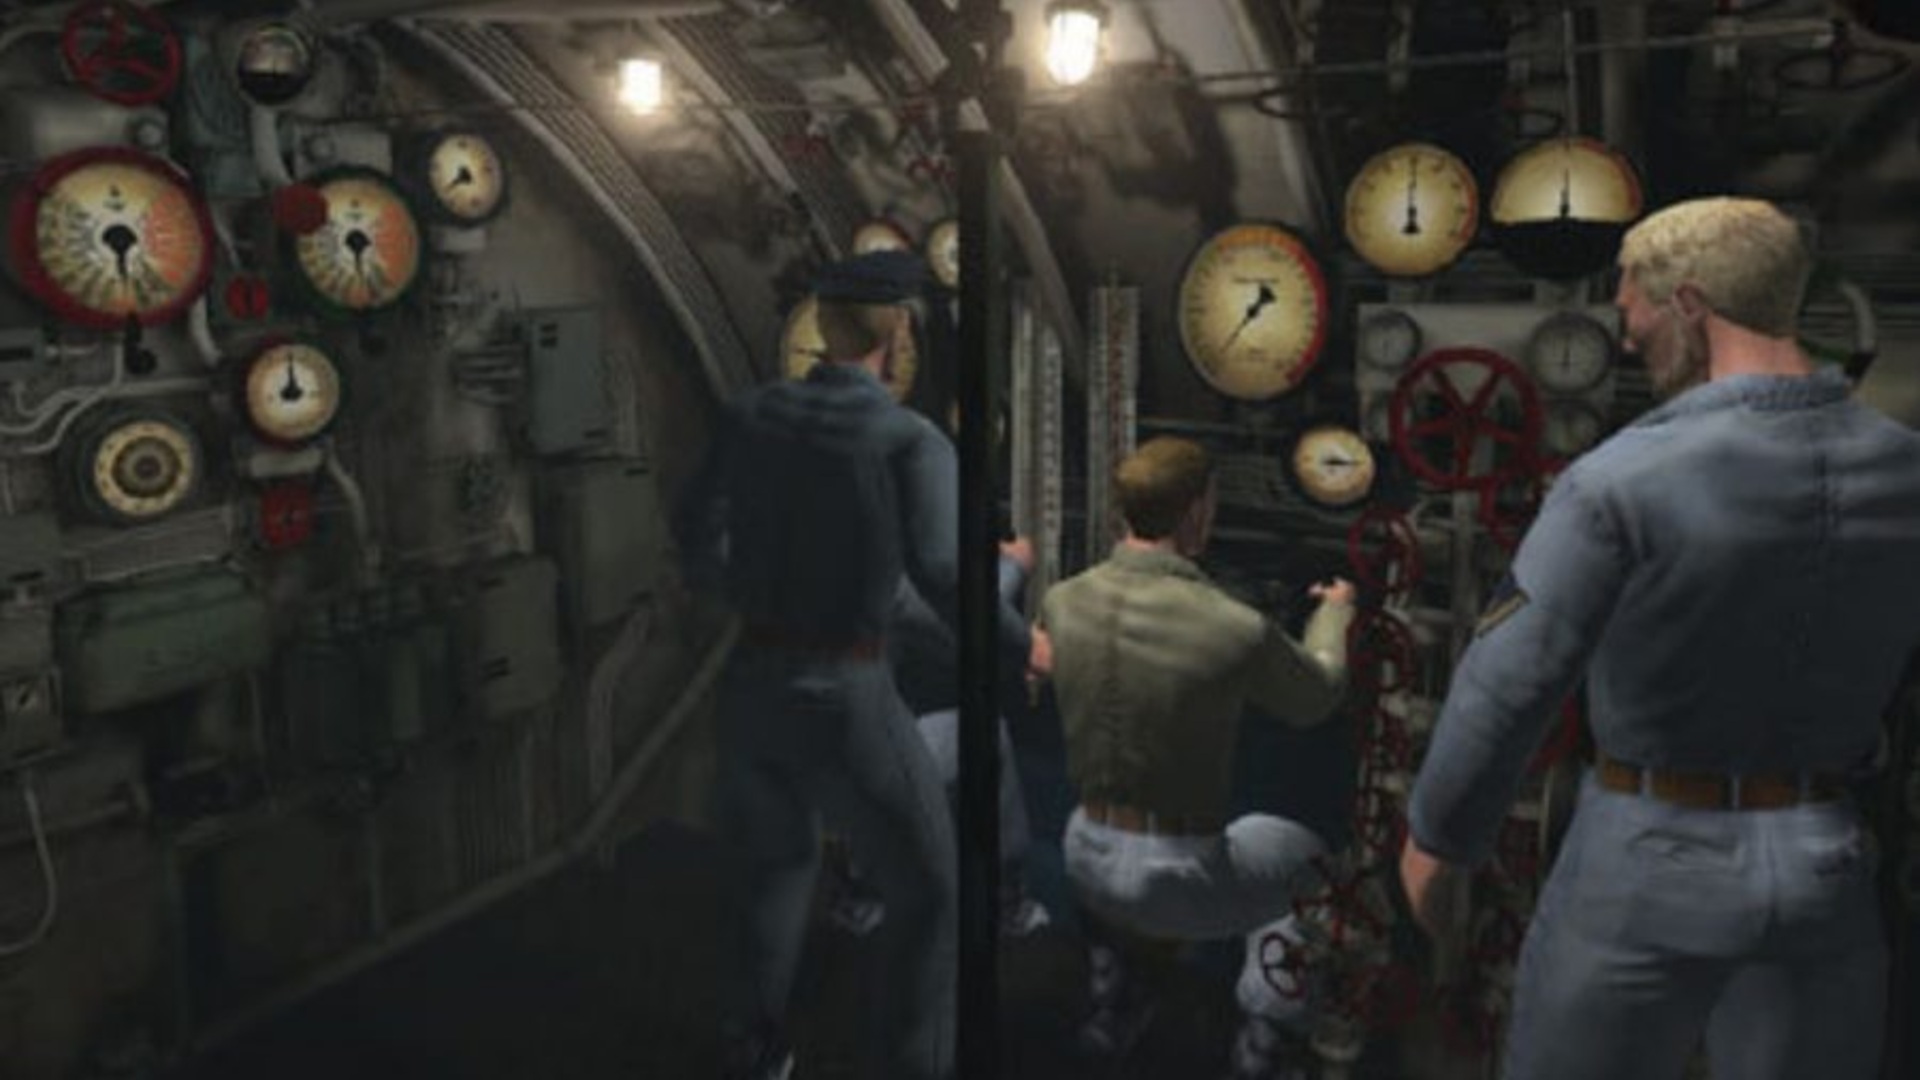 Best WW2 games: Silent Hunter III. Image shows crewmembers aboard a submarine.